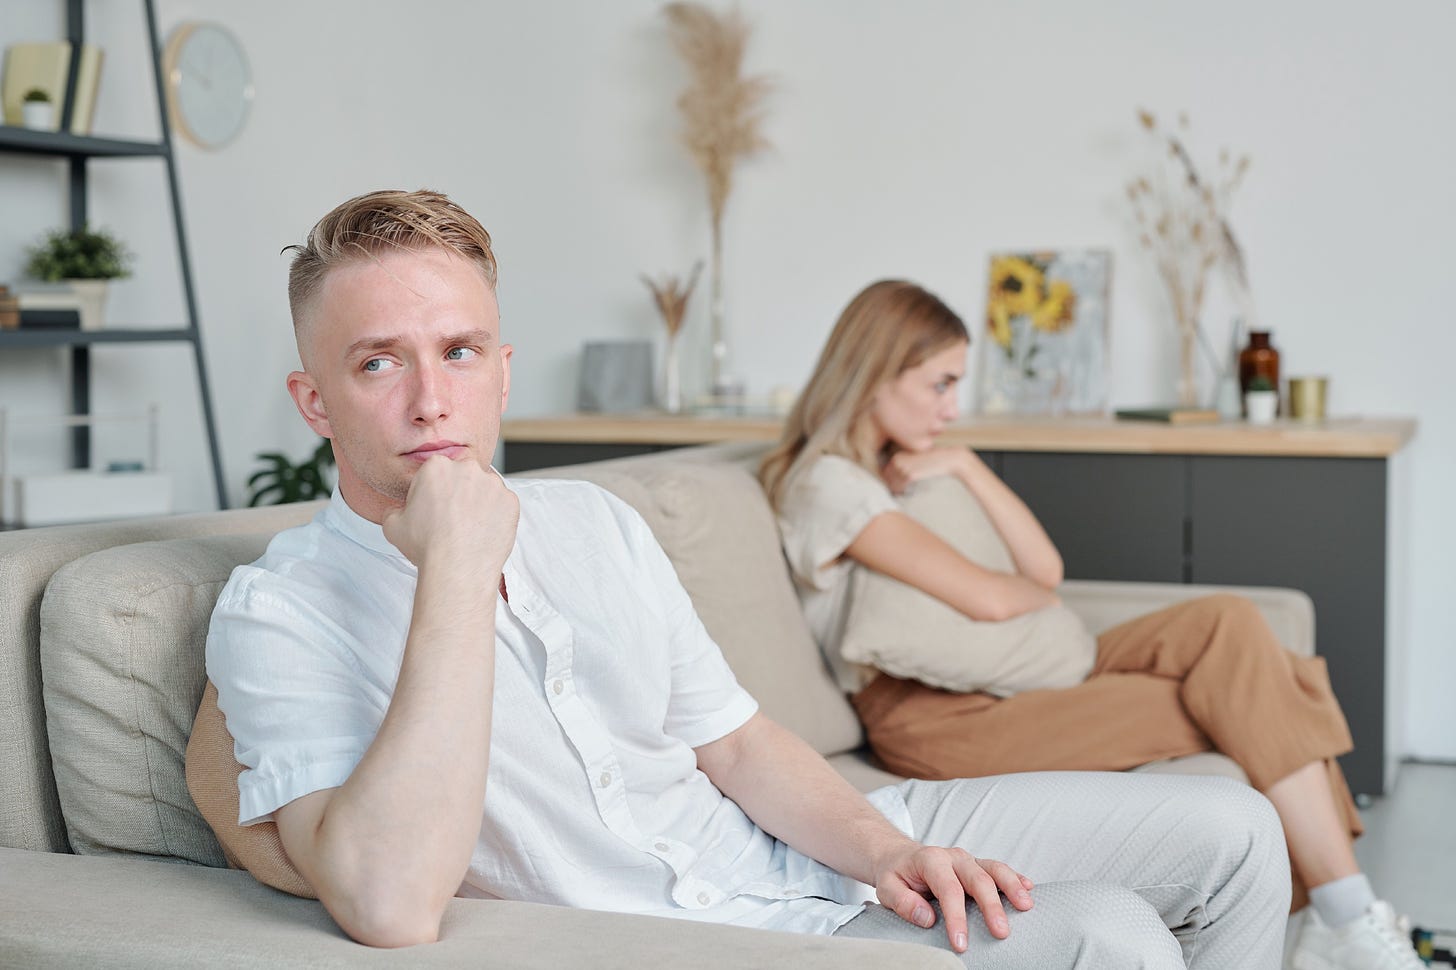 A couple with concerned faces sit apart from one another on the couch.